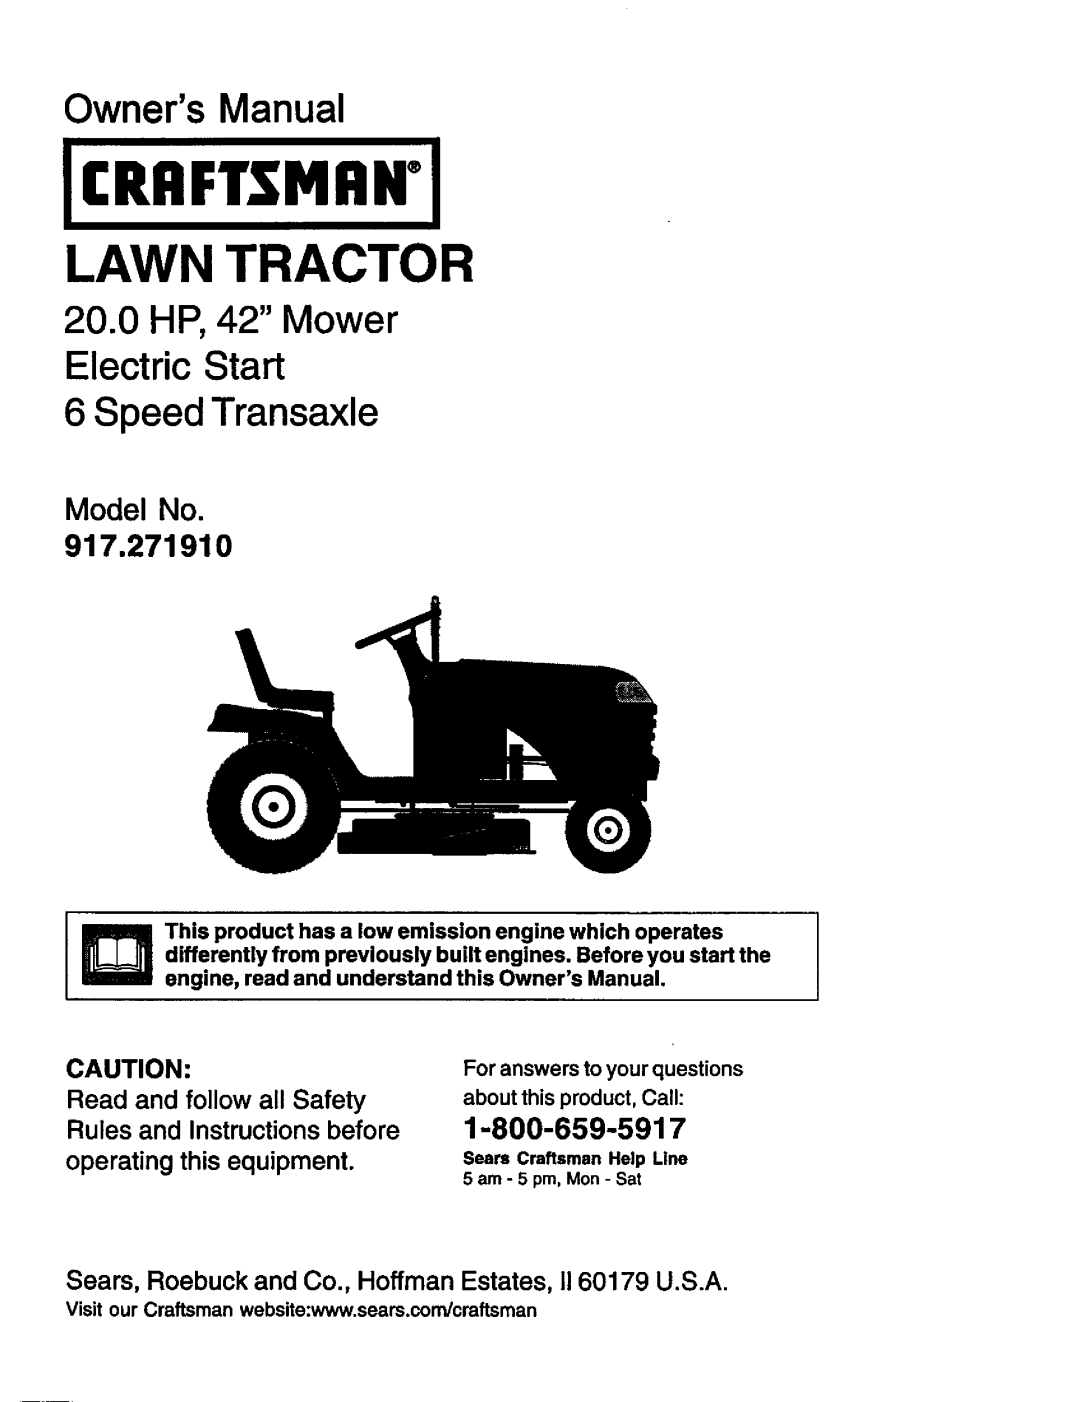 Craftsman owner manual Model No, Icraft.Tmani, Lawn Tractor, Owners Manual, 917.271910, 1-800-659-5917 